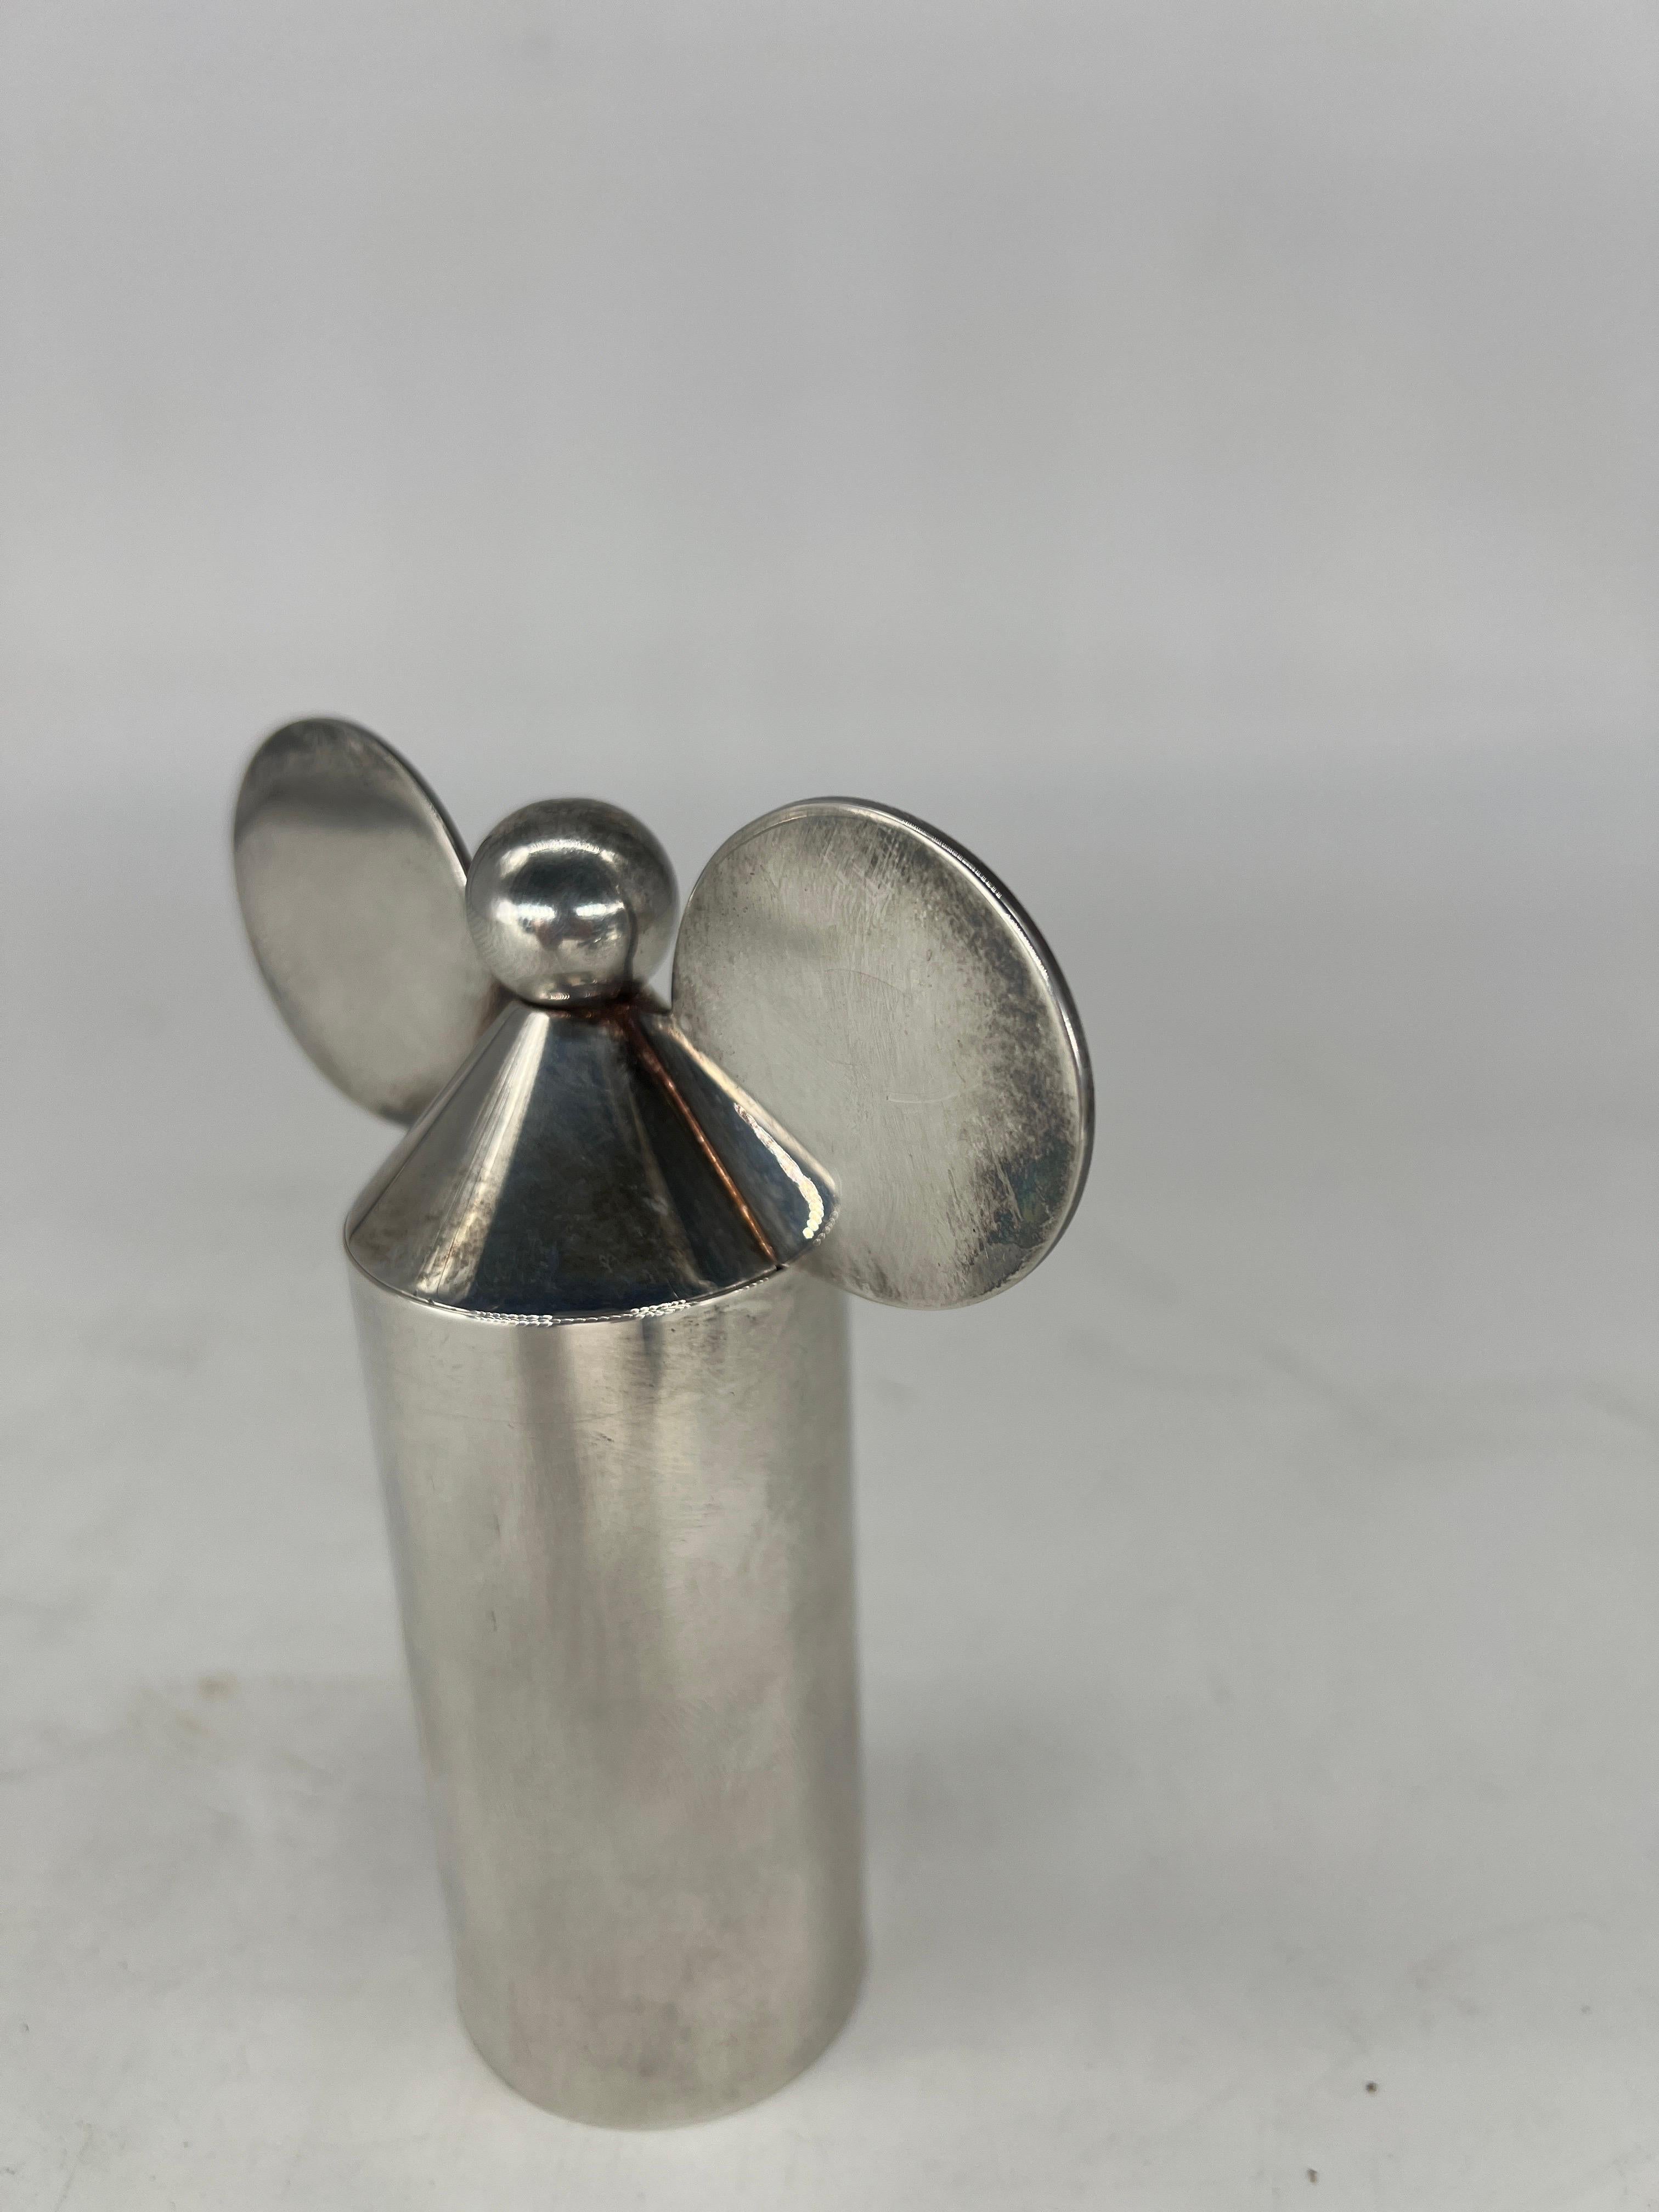 Designer: Robert and Trix Haussmann (1931 – present and 1933 -present) for Swid Powell (established 1982). 

A whimsical but important modern design, often described as the “Disney” pepper mill, but according to Tapert's book it 